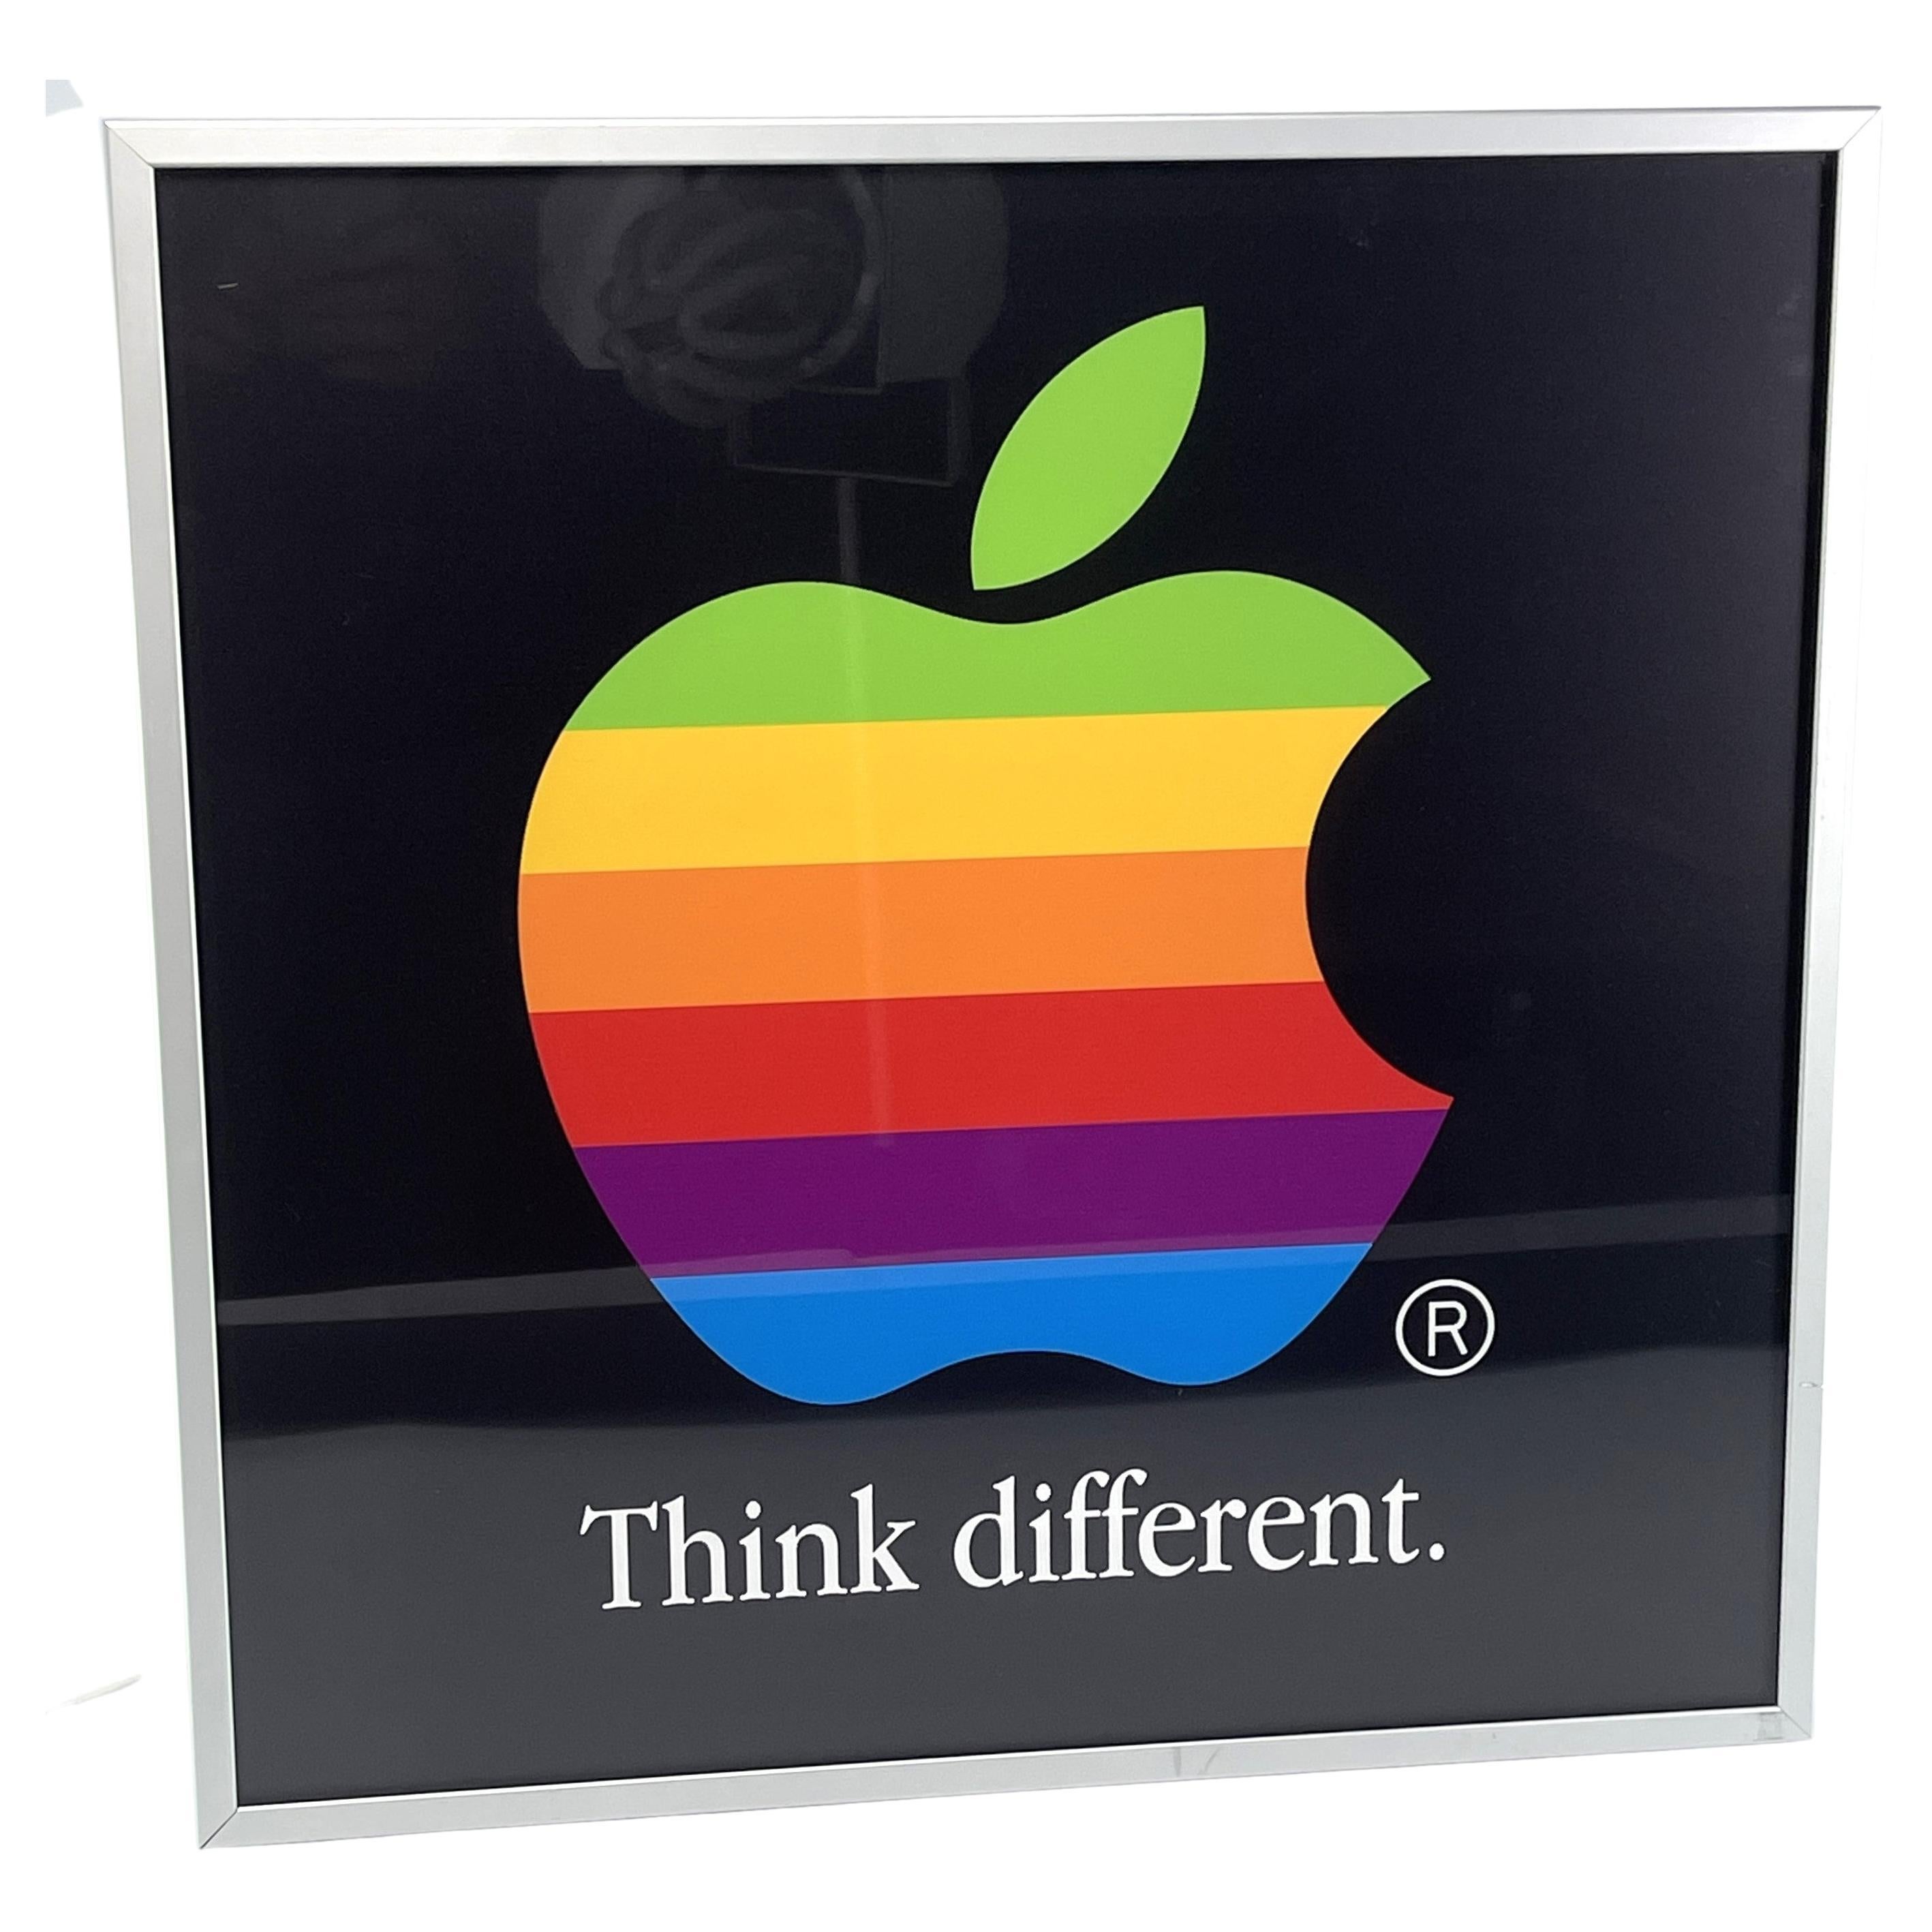 original Apple neon sign "Think different" with Apple LOGO, 1997 